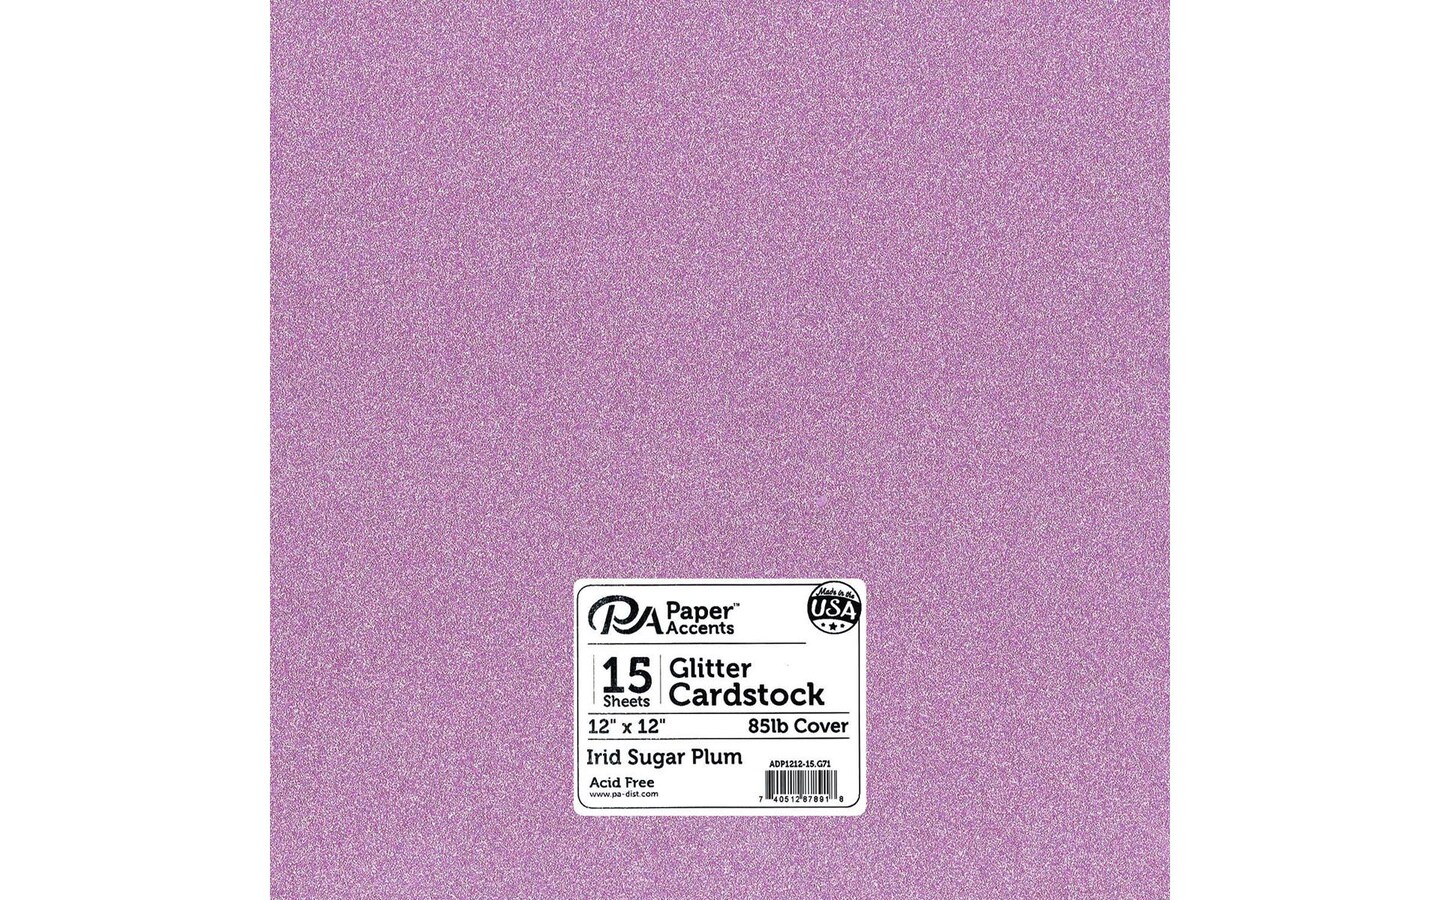 PA Paper Accents Glitter Cardstock 12&#x22; x 12&#x22; Iridescent Sugar Plum, 85lb colored cardstock paper for card making, scrapbooking, printing, quilling and crafts, 15 piece pack